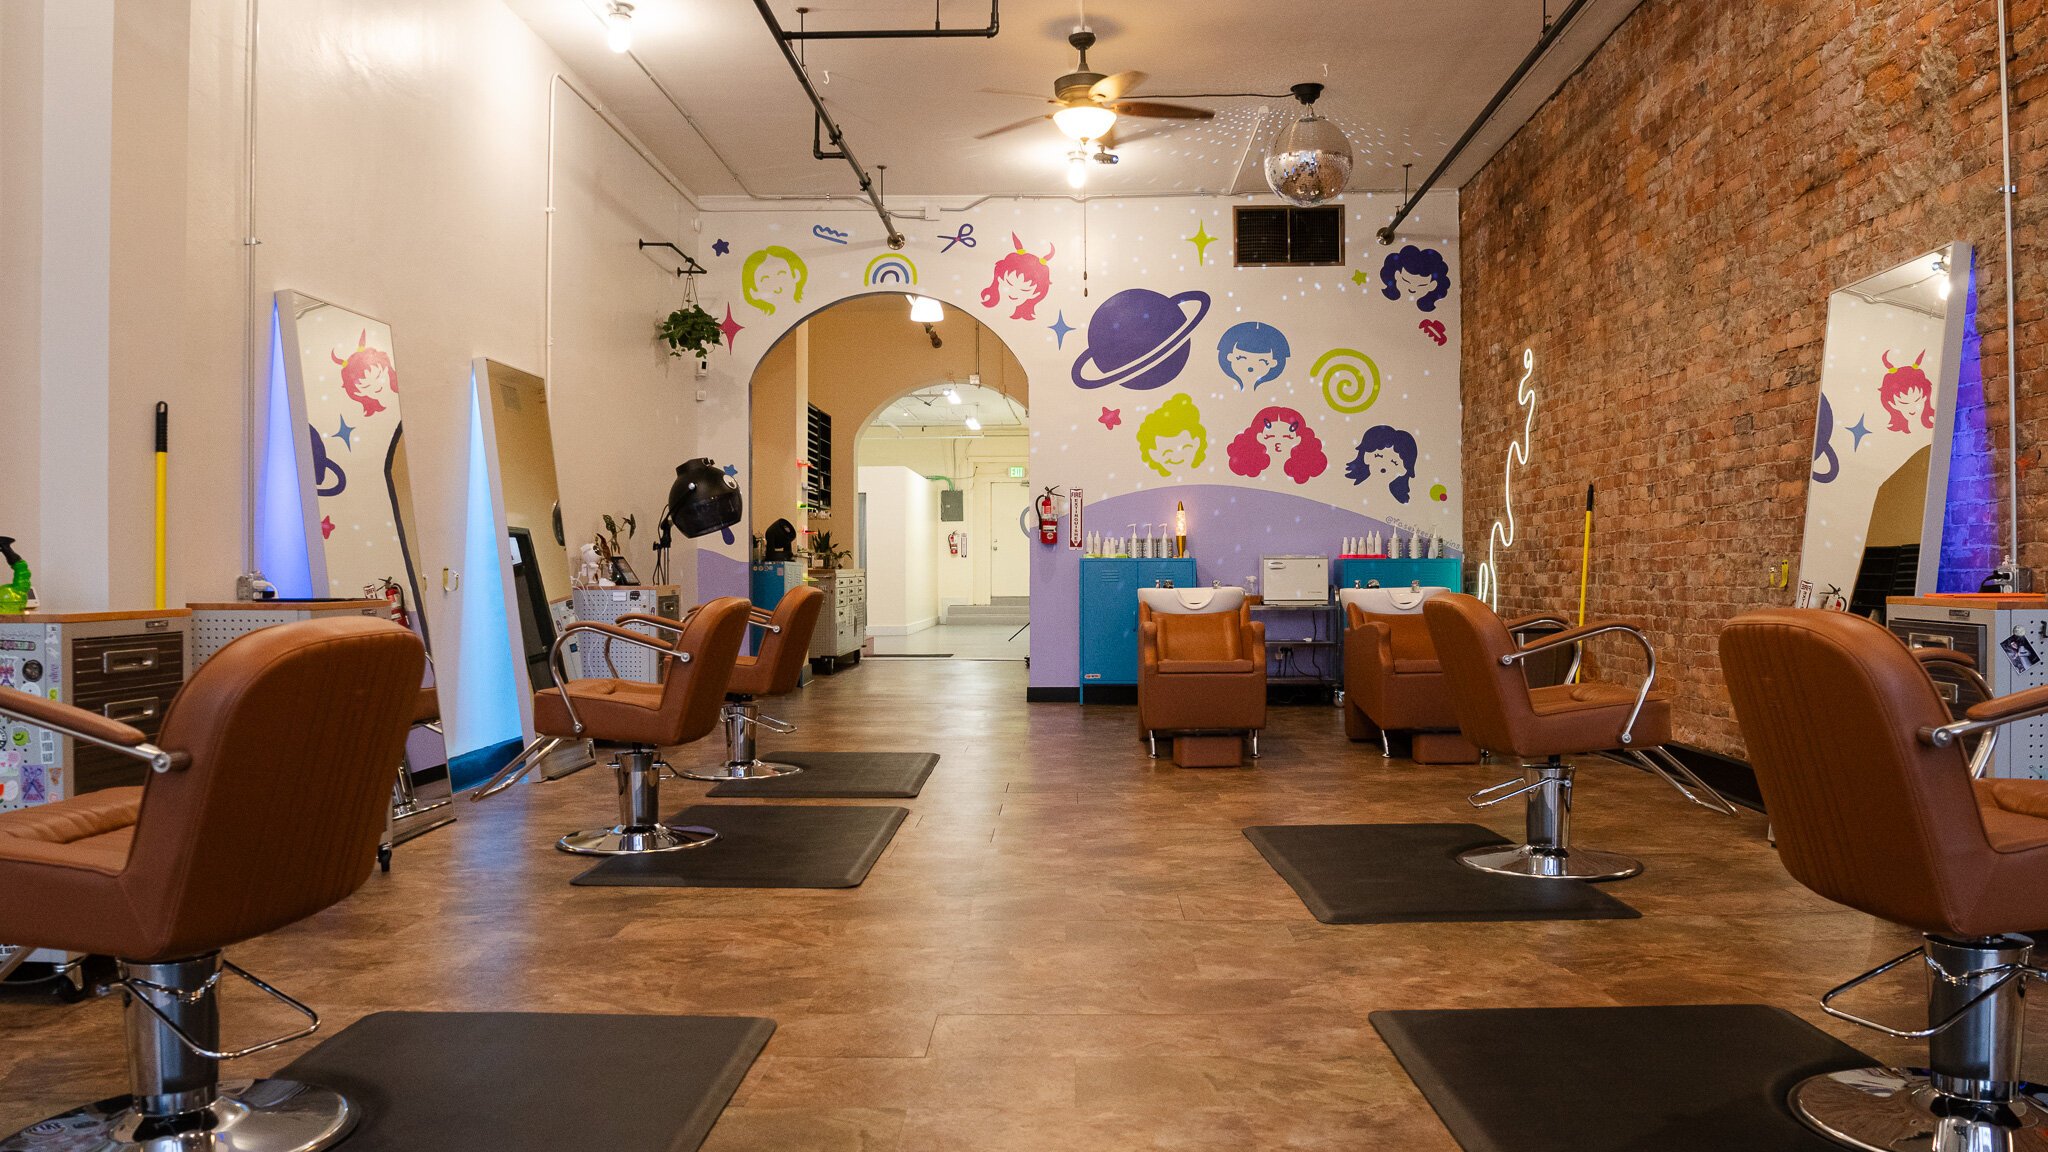 The Space Salon owner Olive refers to the salon's decor style as "space disco."